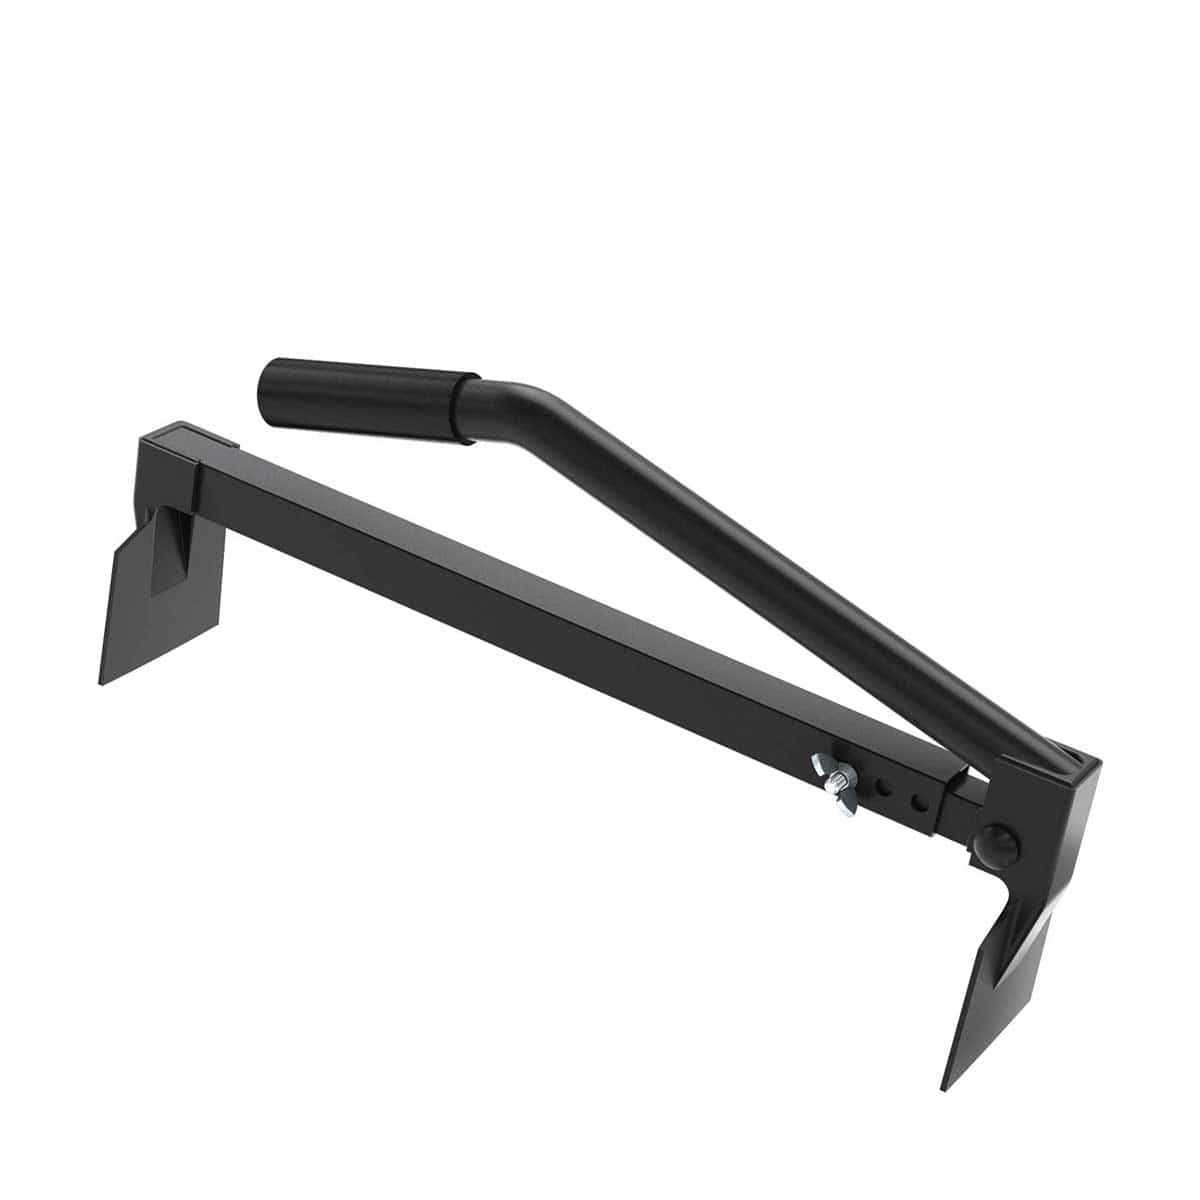 Bon Tool Brick Tongs with Rubber Grip